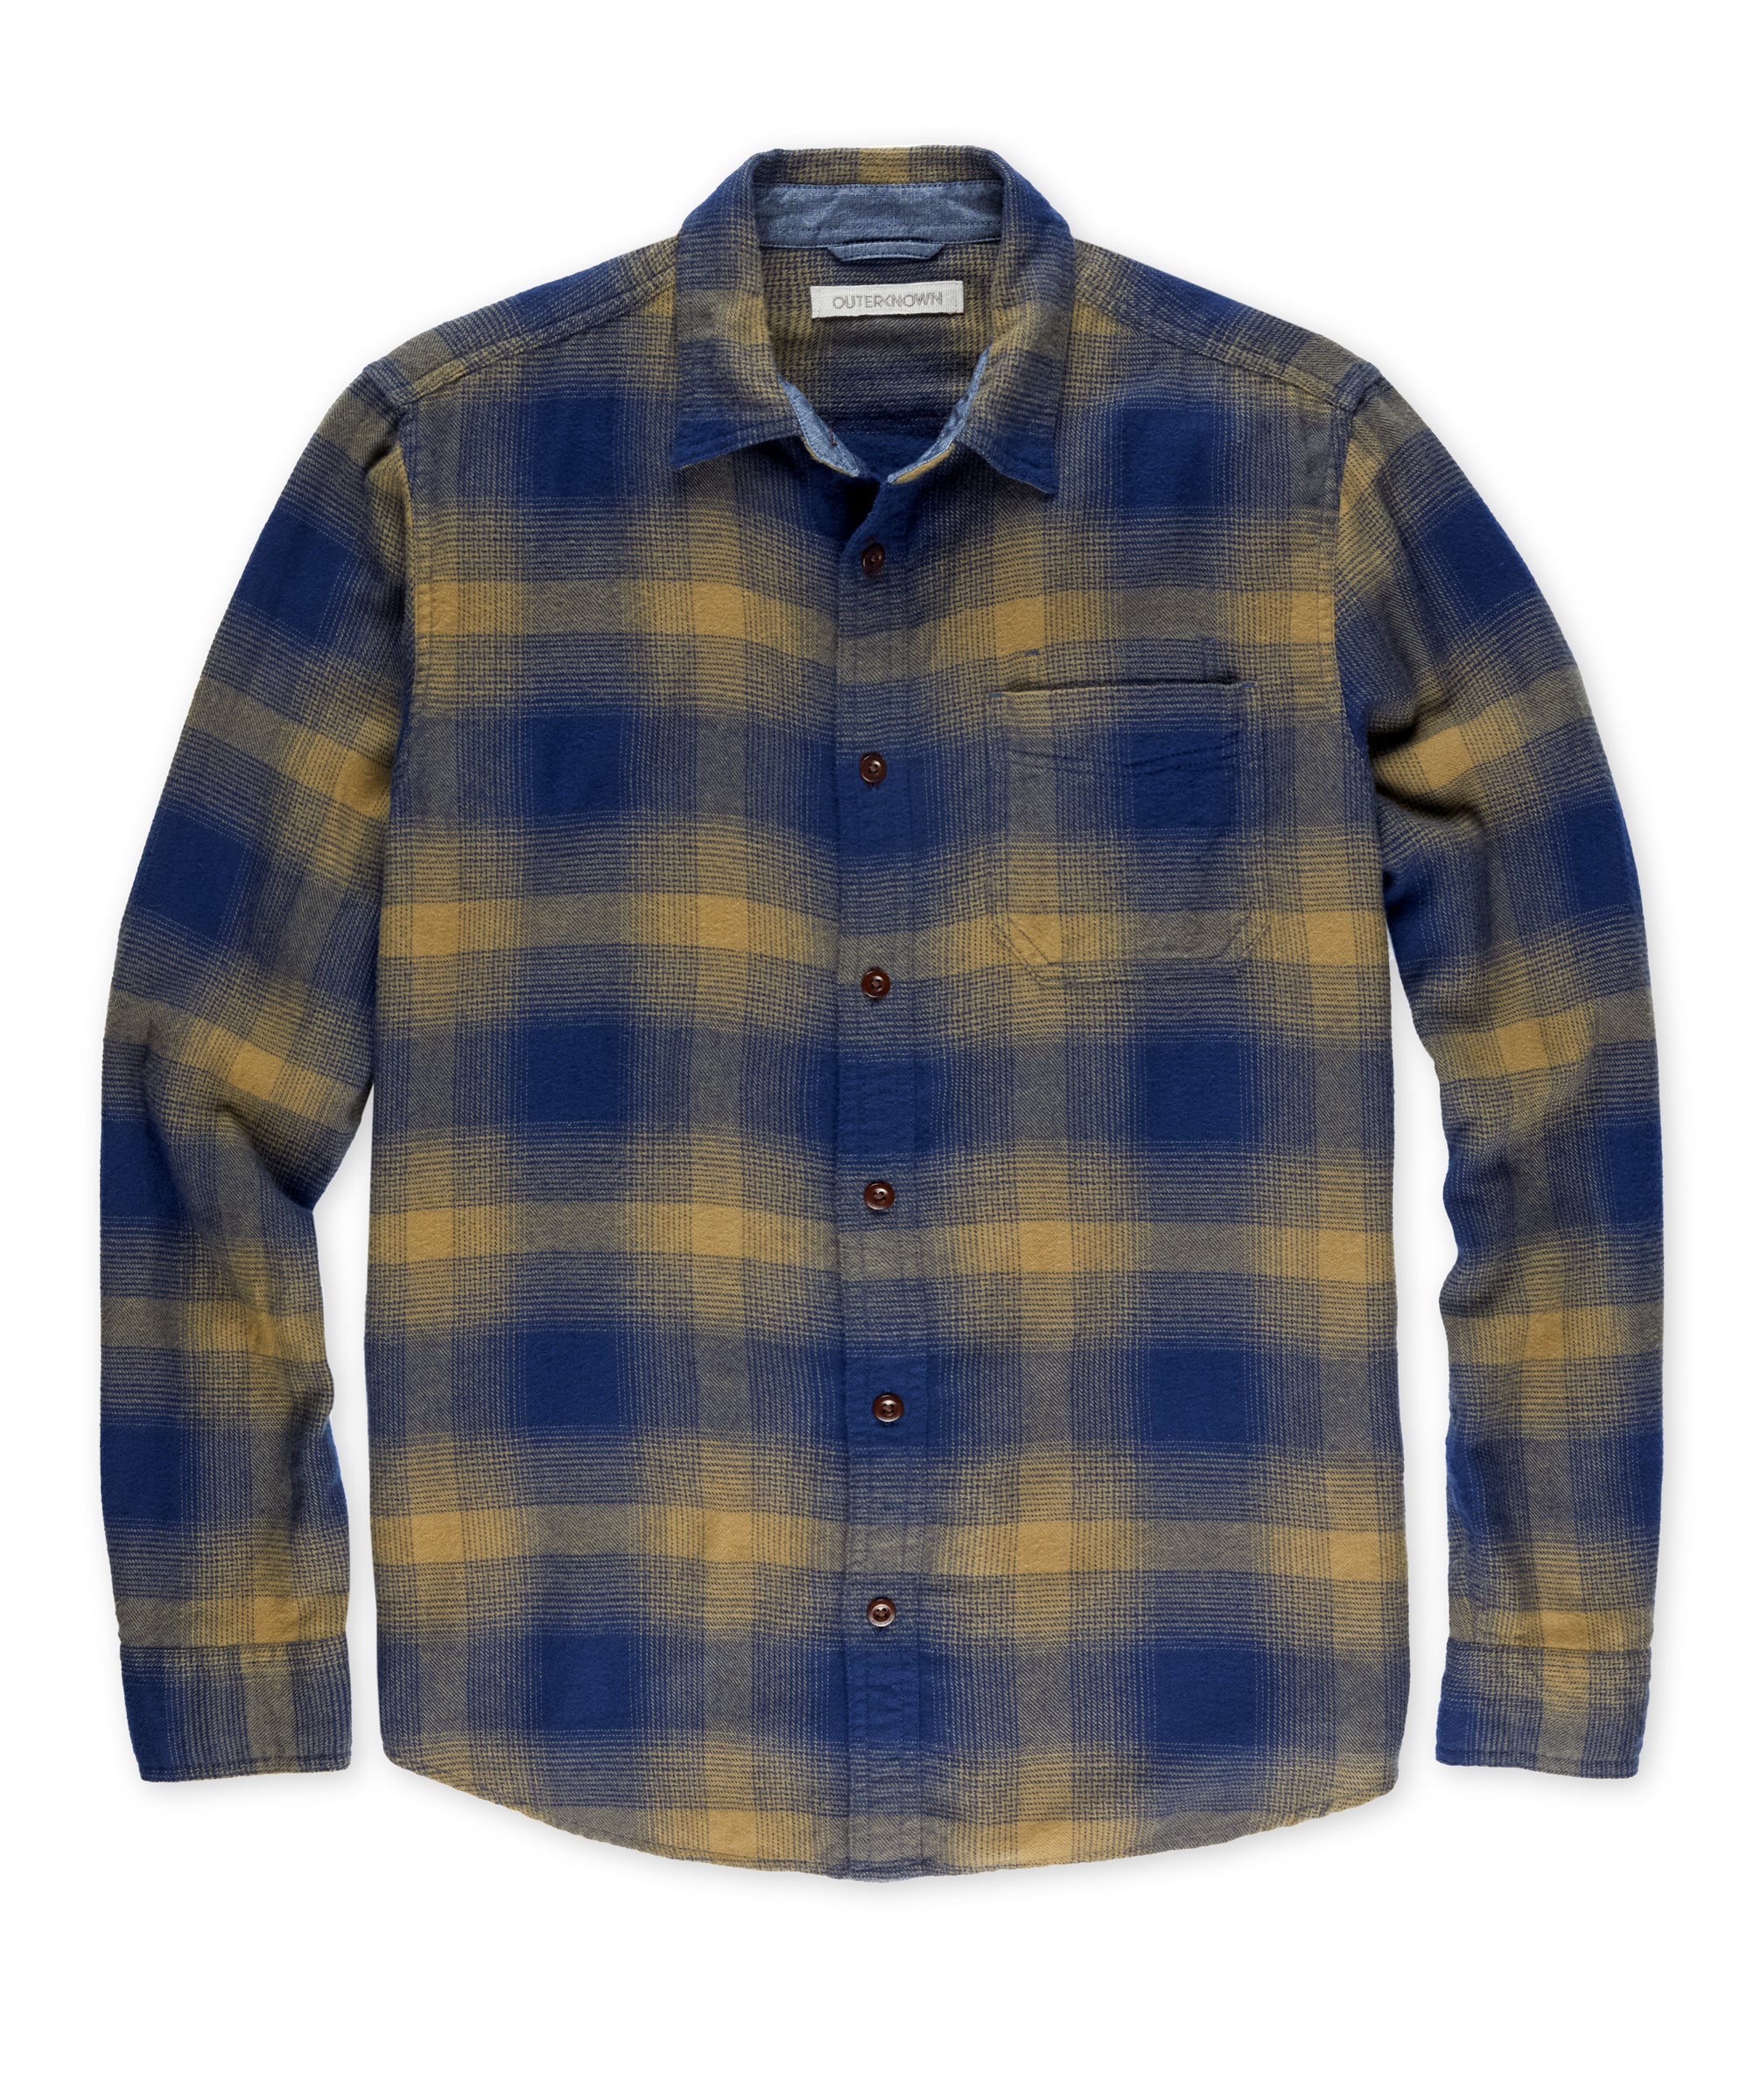 Transitional Flannel Shirt | Men's Shirts | Outerknown